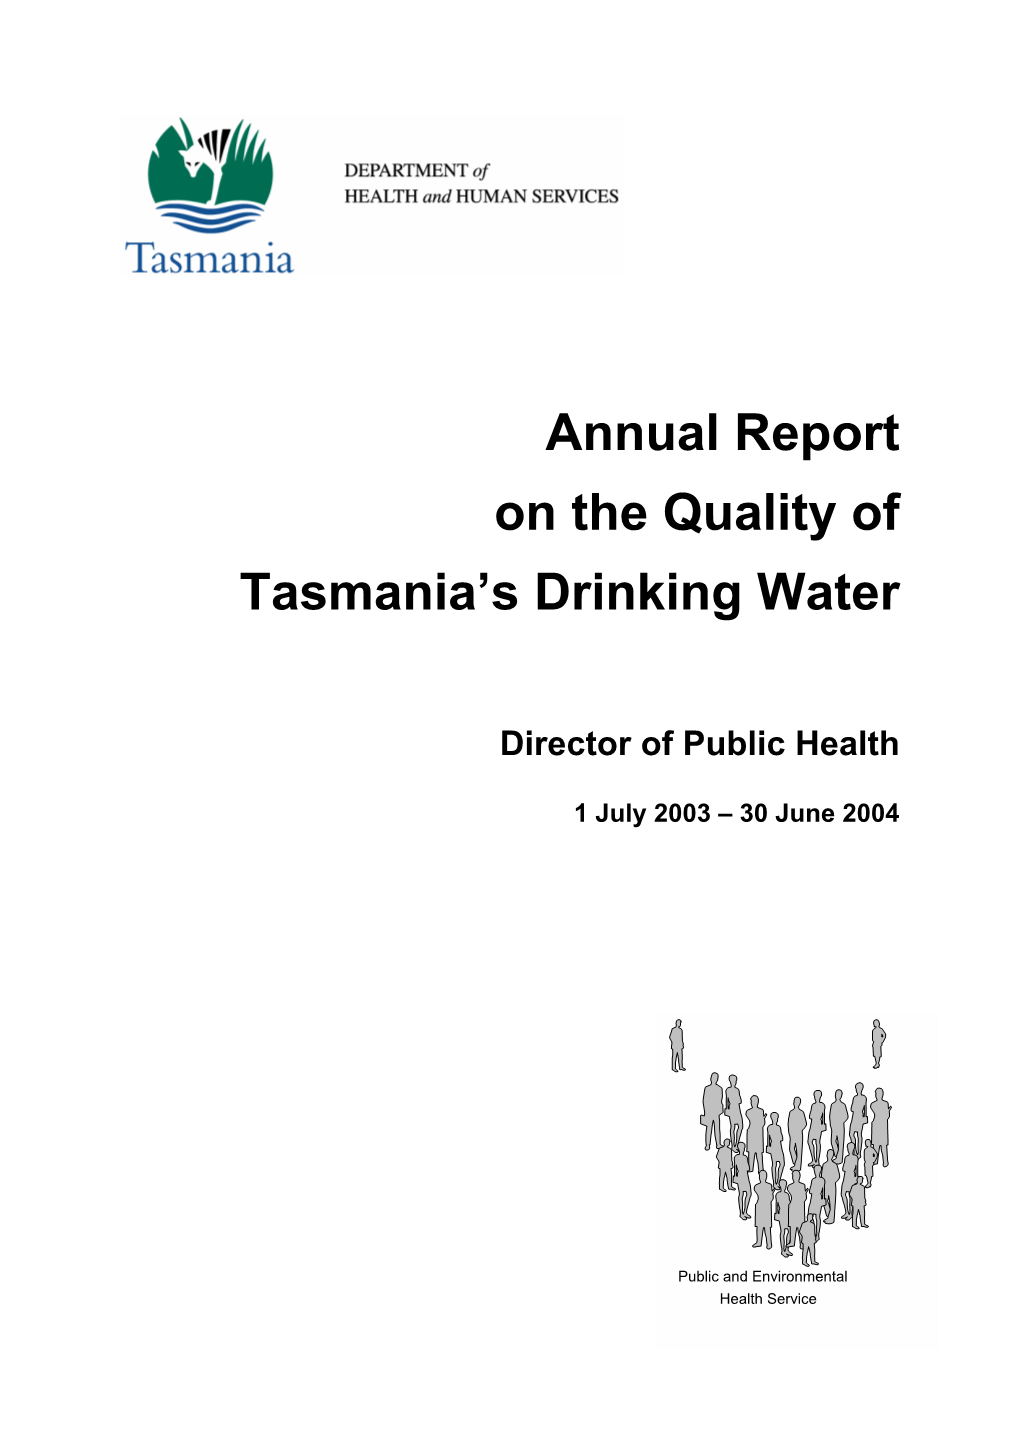 Annual Report on the Quality of Tasmania's Drinking Water